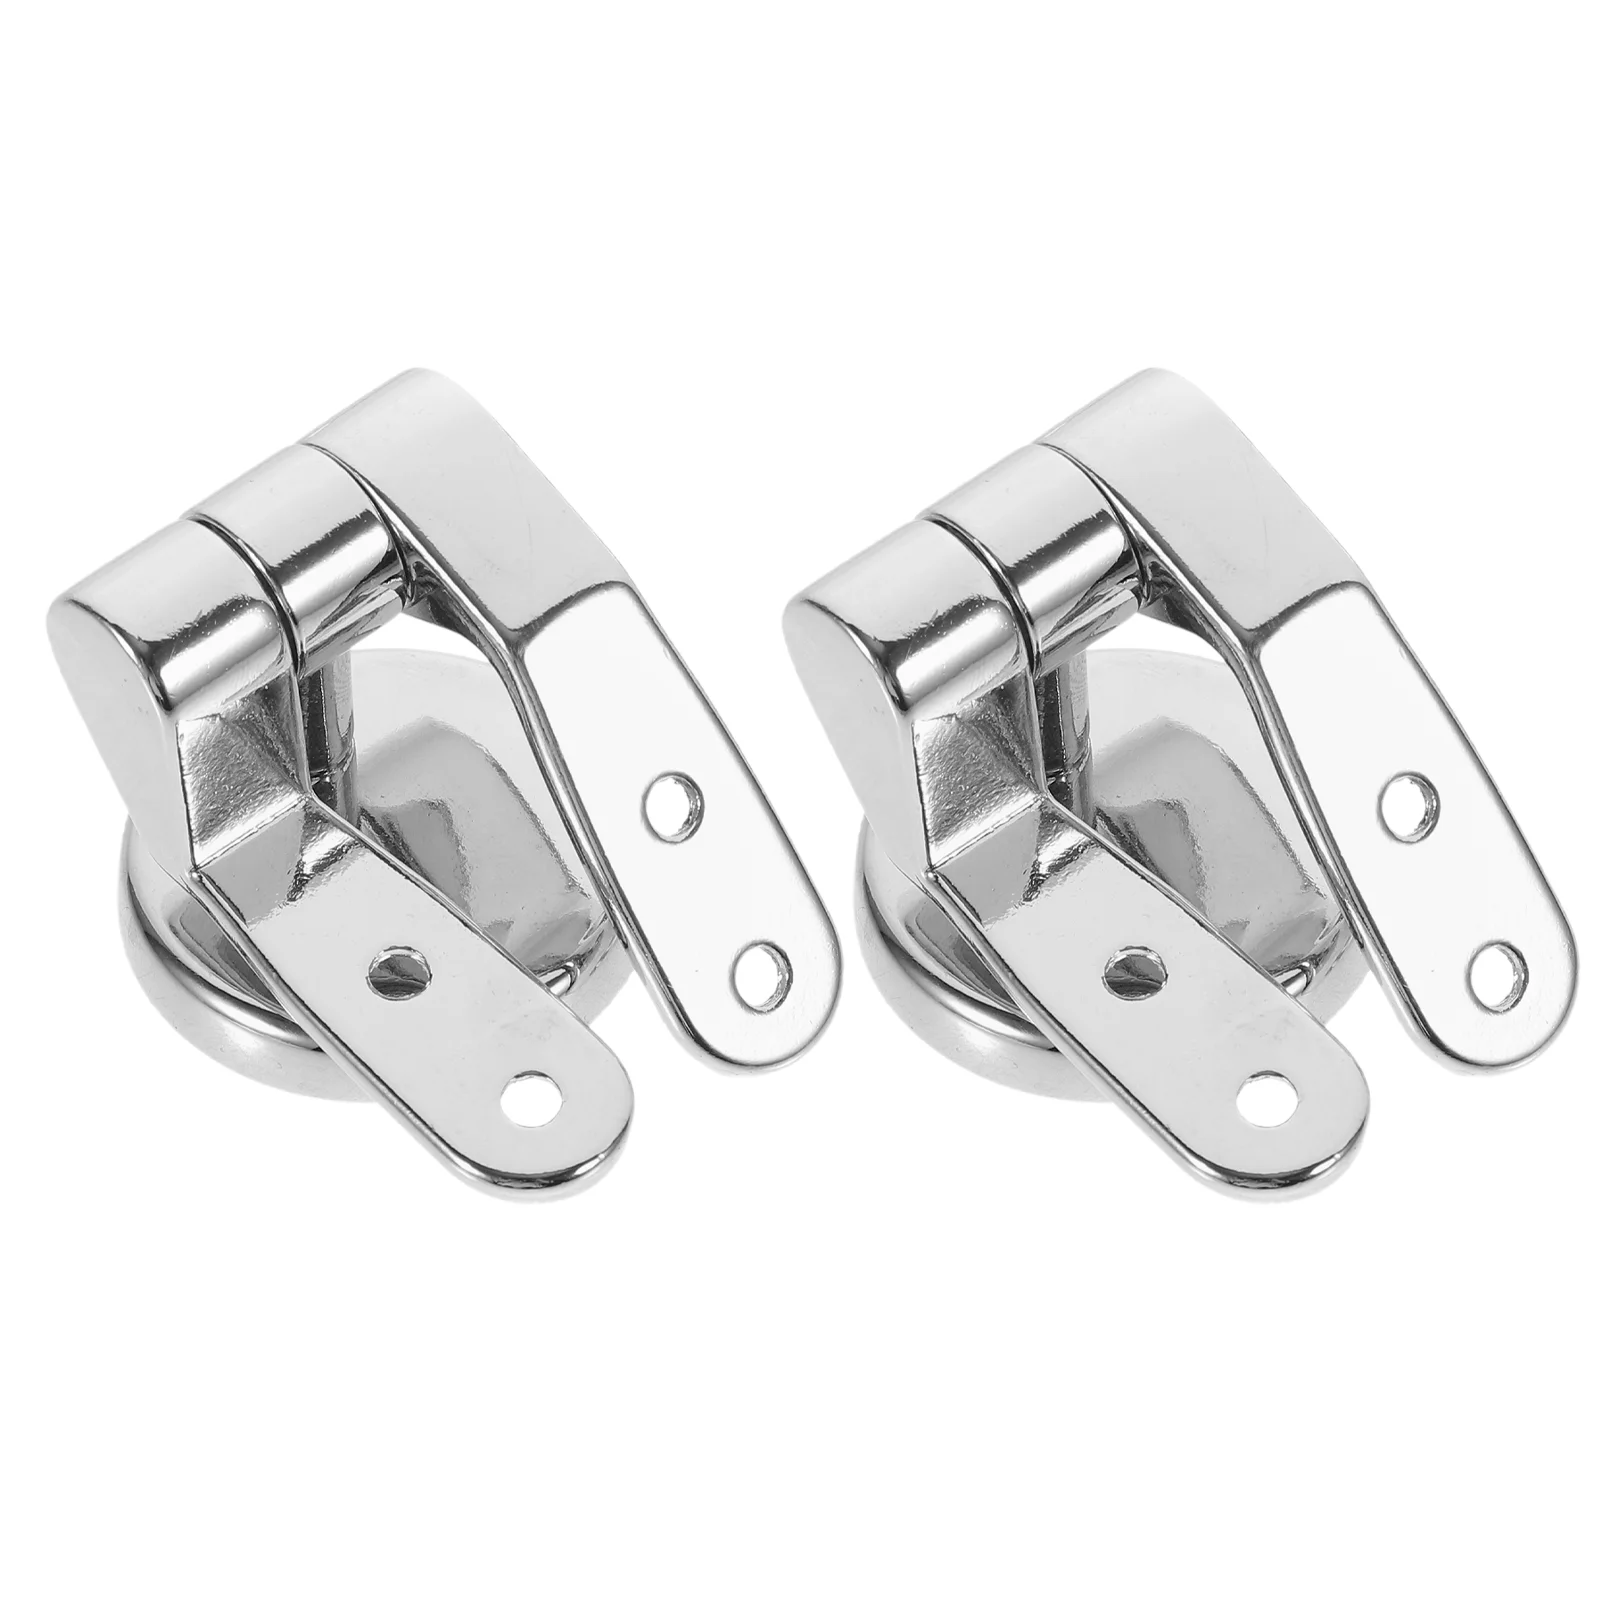 

Toilet Lid Hinge Seat Fixing Screws Adjustable Fittings Accessories An Bolts Replacement Hinges Stainless Steel Nuts